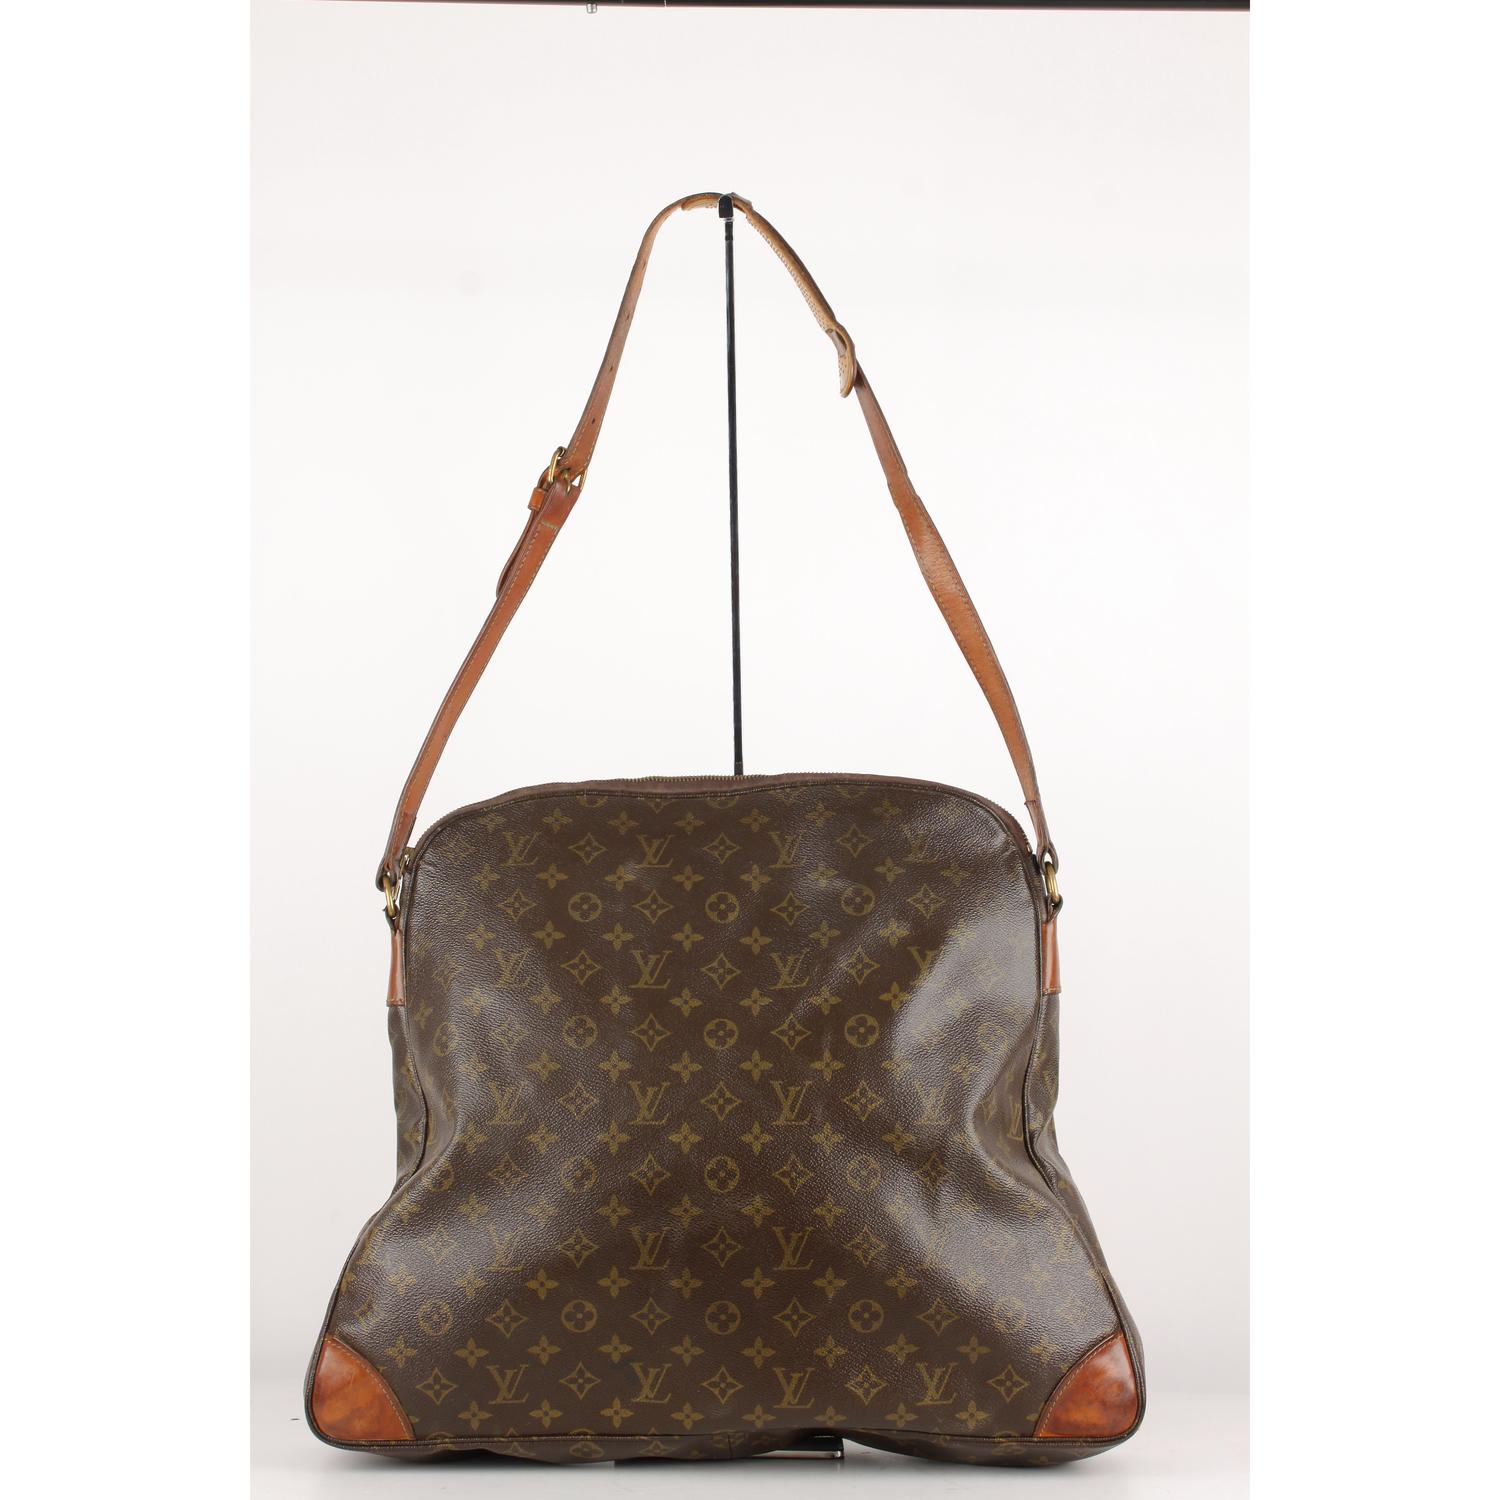 Louis Vuitton Vintage Monogram Canvas Sac Balade Shoulder Bag

Material:L Canvas
Color: Brown
Model: Sac Balade
Gender: Women
Country of Manufacture: France
Size: Large 
Bag Depth: 3 inches - 7,6 cm 
Bag Height: 16 inches - 40,7 cm 
Bag Length: 18